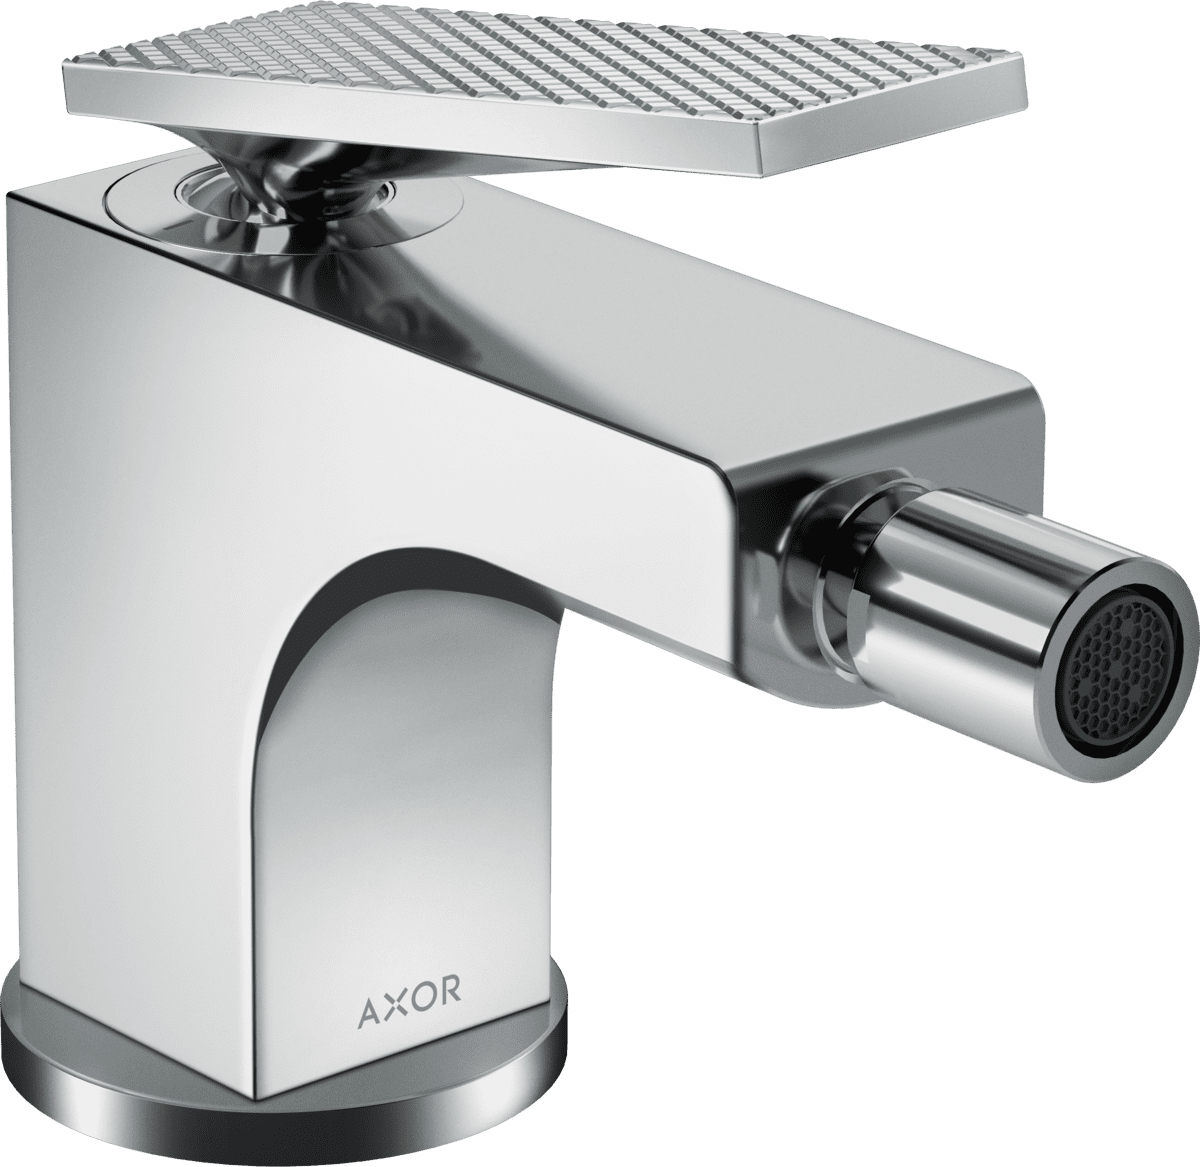 Picture of HANSGROHE AXOR Citterio Single lever bidet mixer with lever handle and pop-up waste set - rhombic cut #39201000 - Chrome